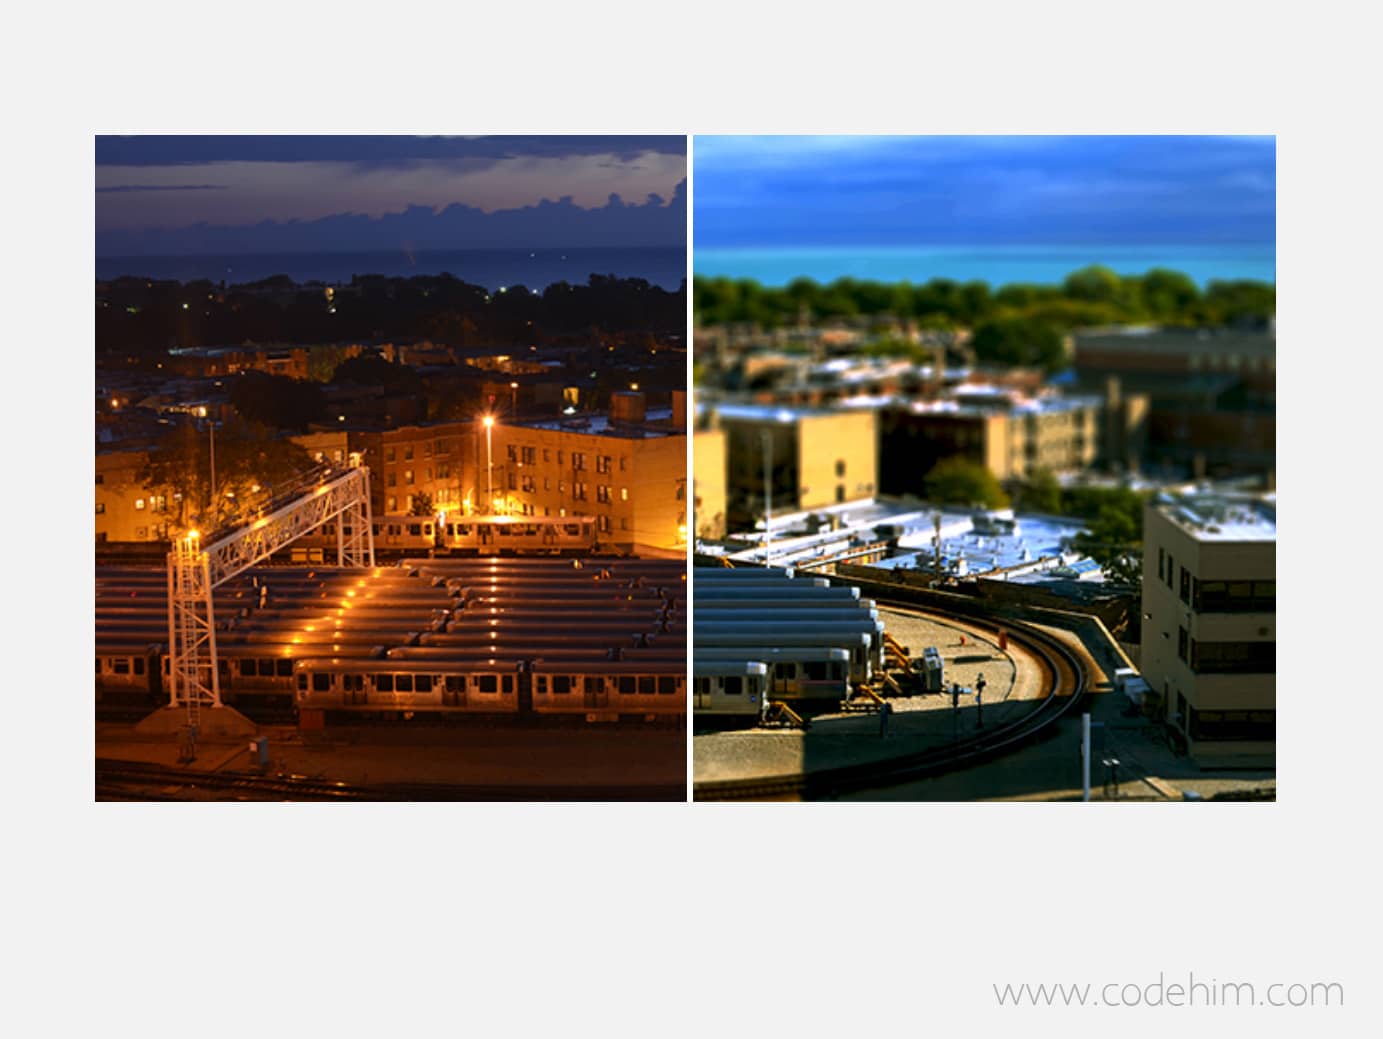 Image Comparison Slider with jQuery and CSS